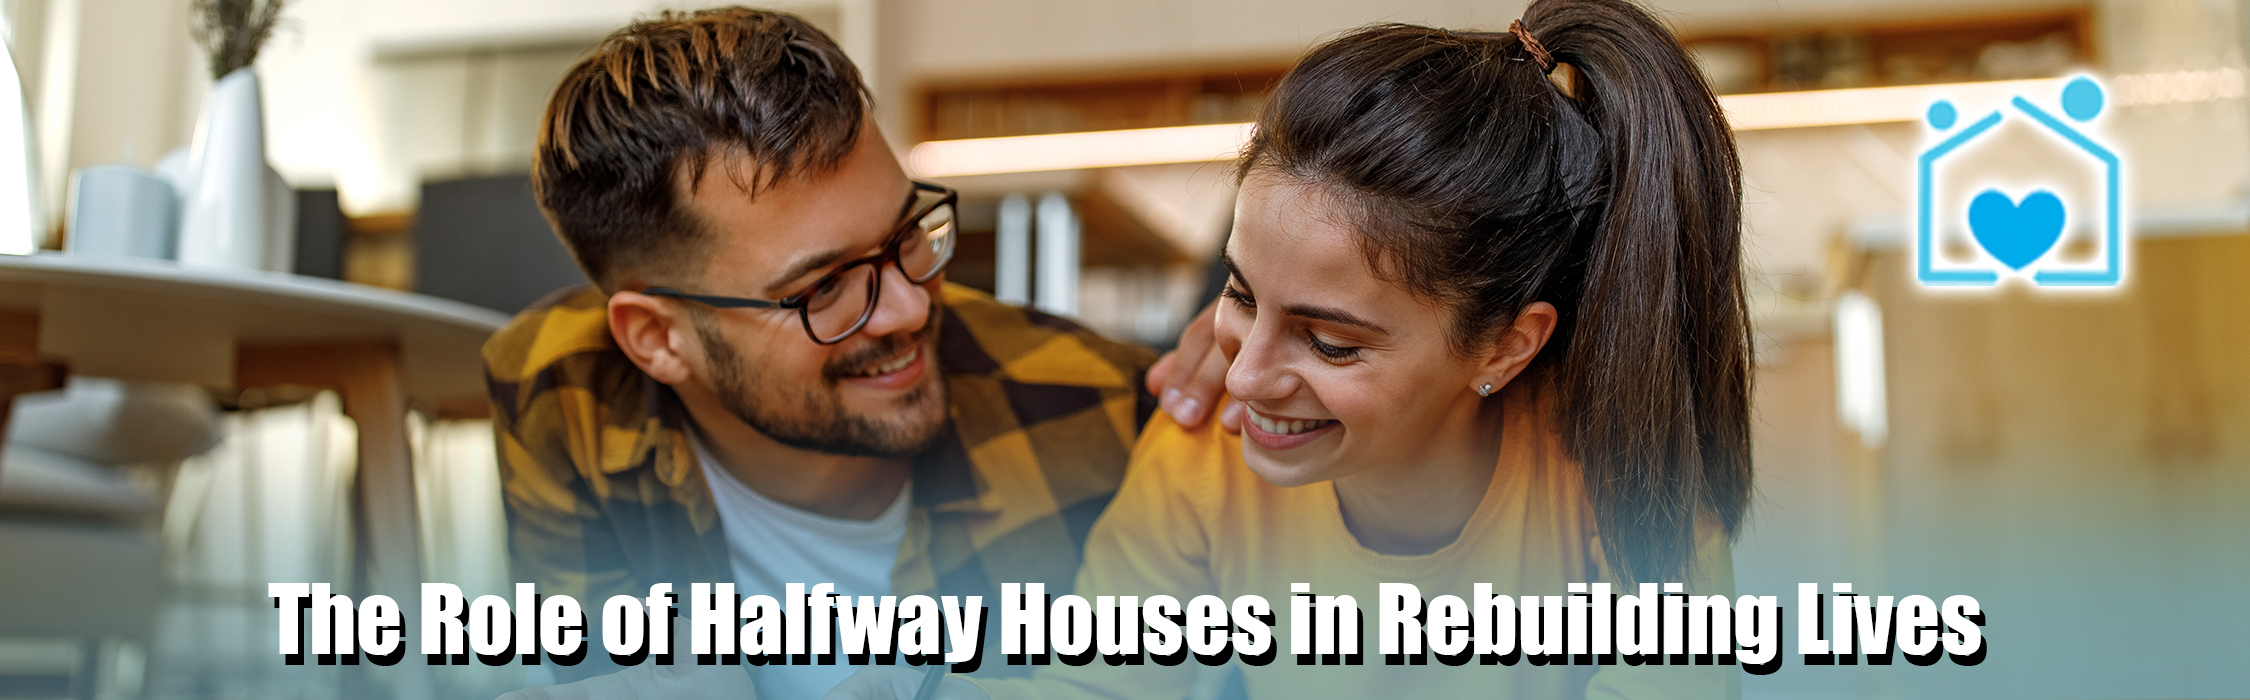 The Role of Halfway Houses in Rebuilding Lives